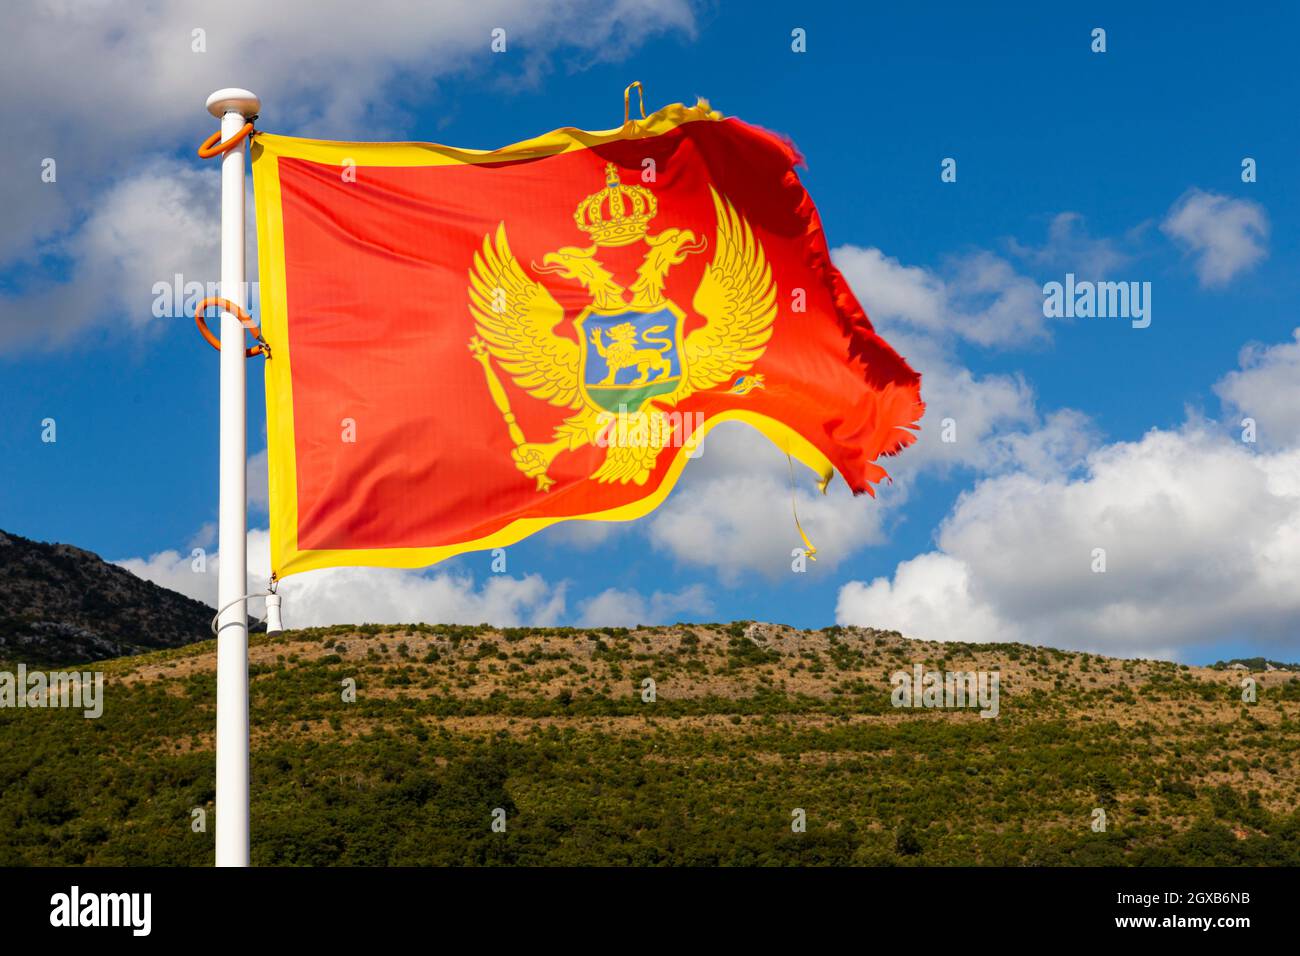 Flag of Montenegro waving in the wind with sky and mountains in background. Stock Photo